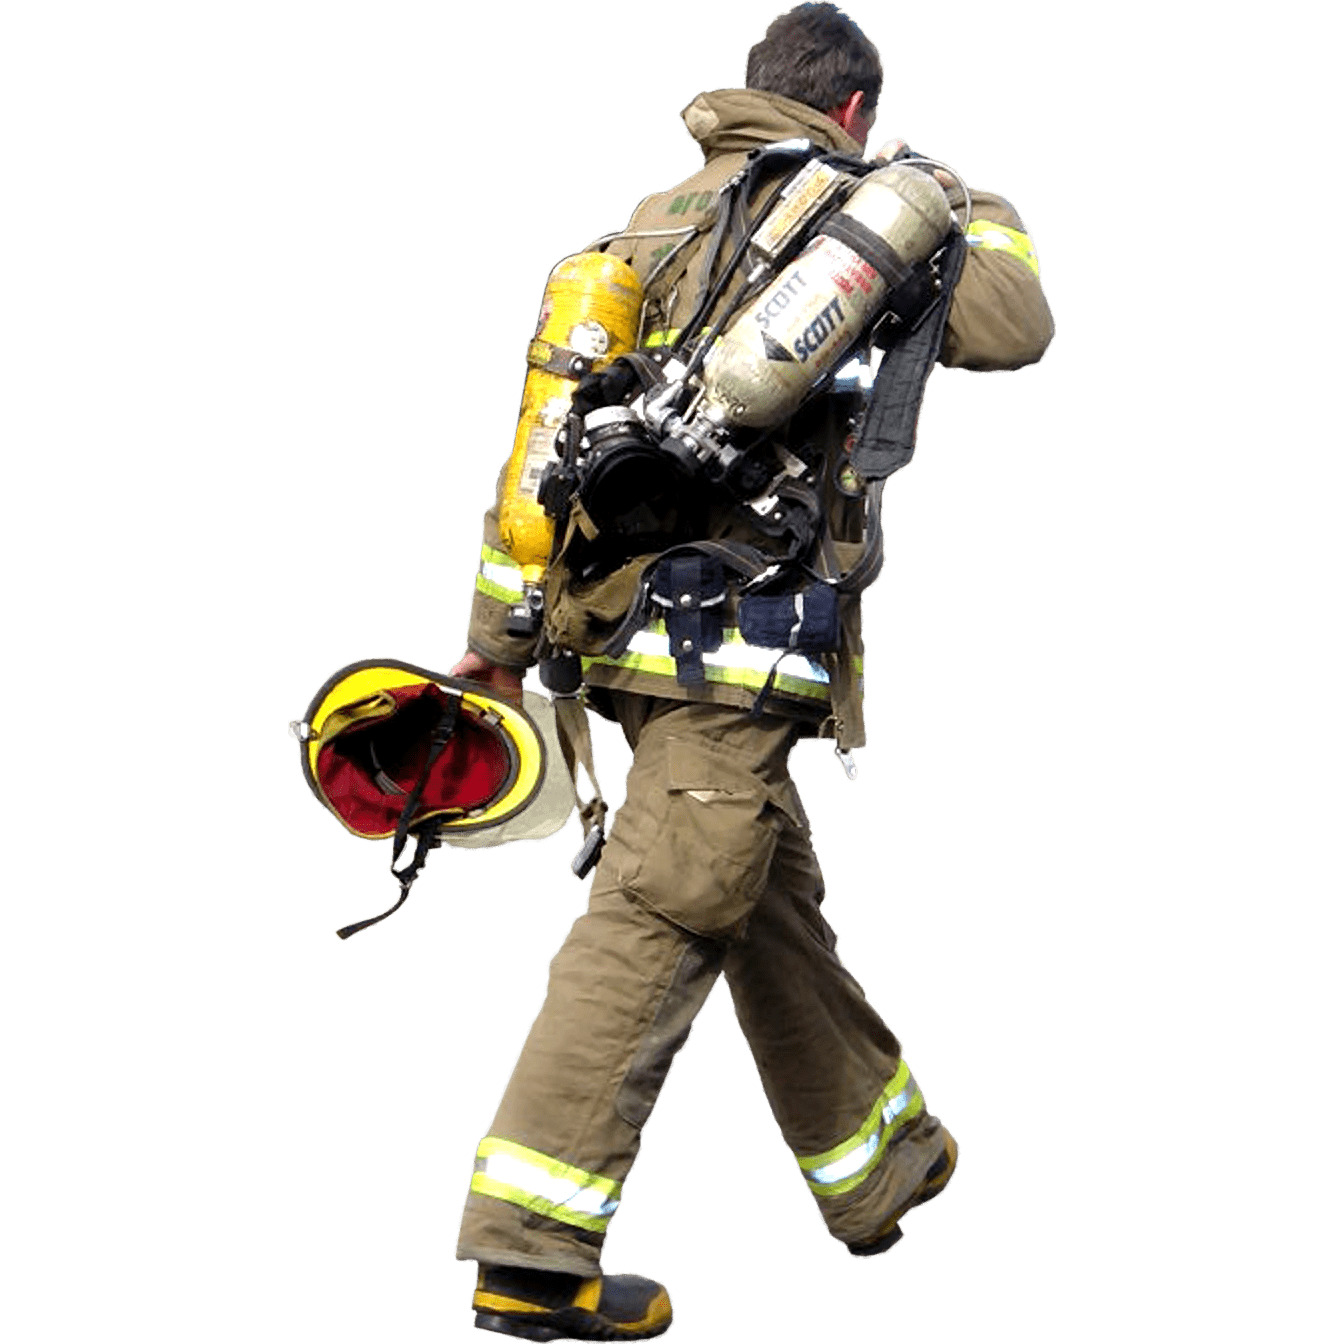 Firefighter Walking icons